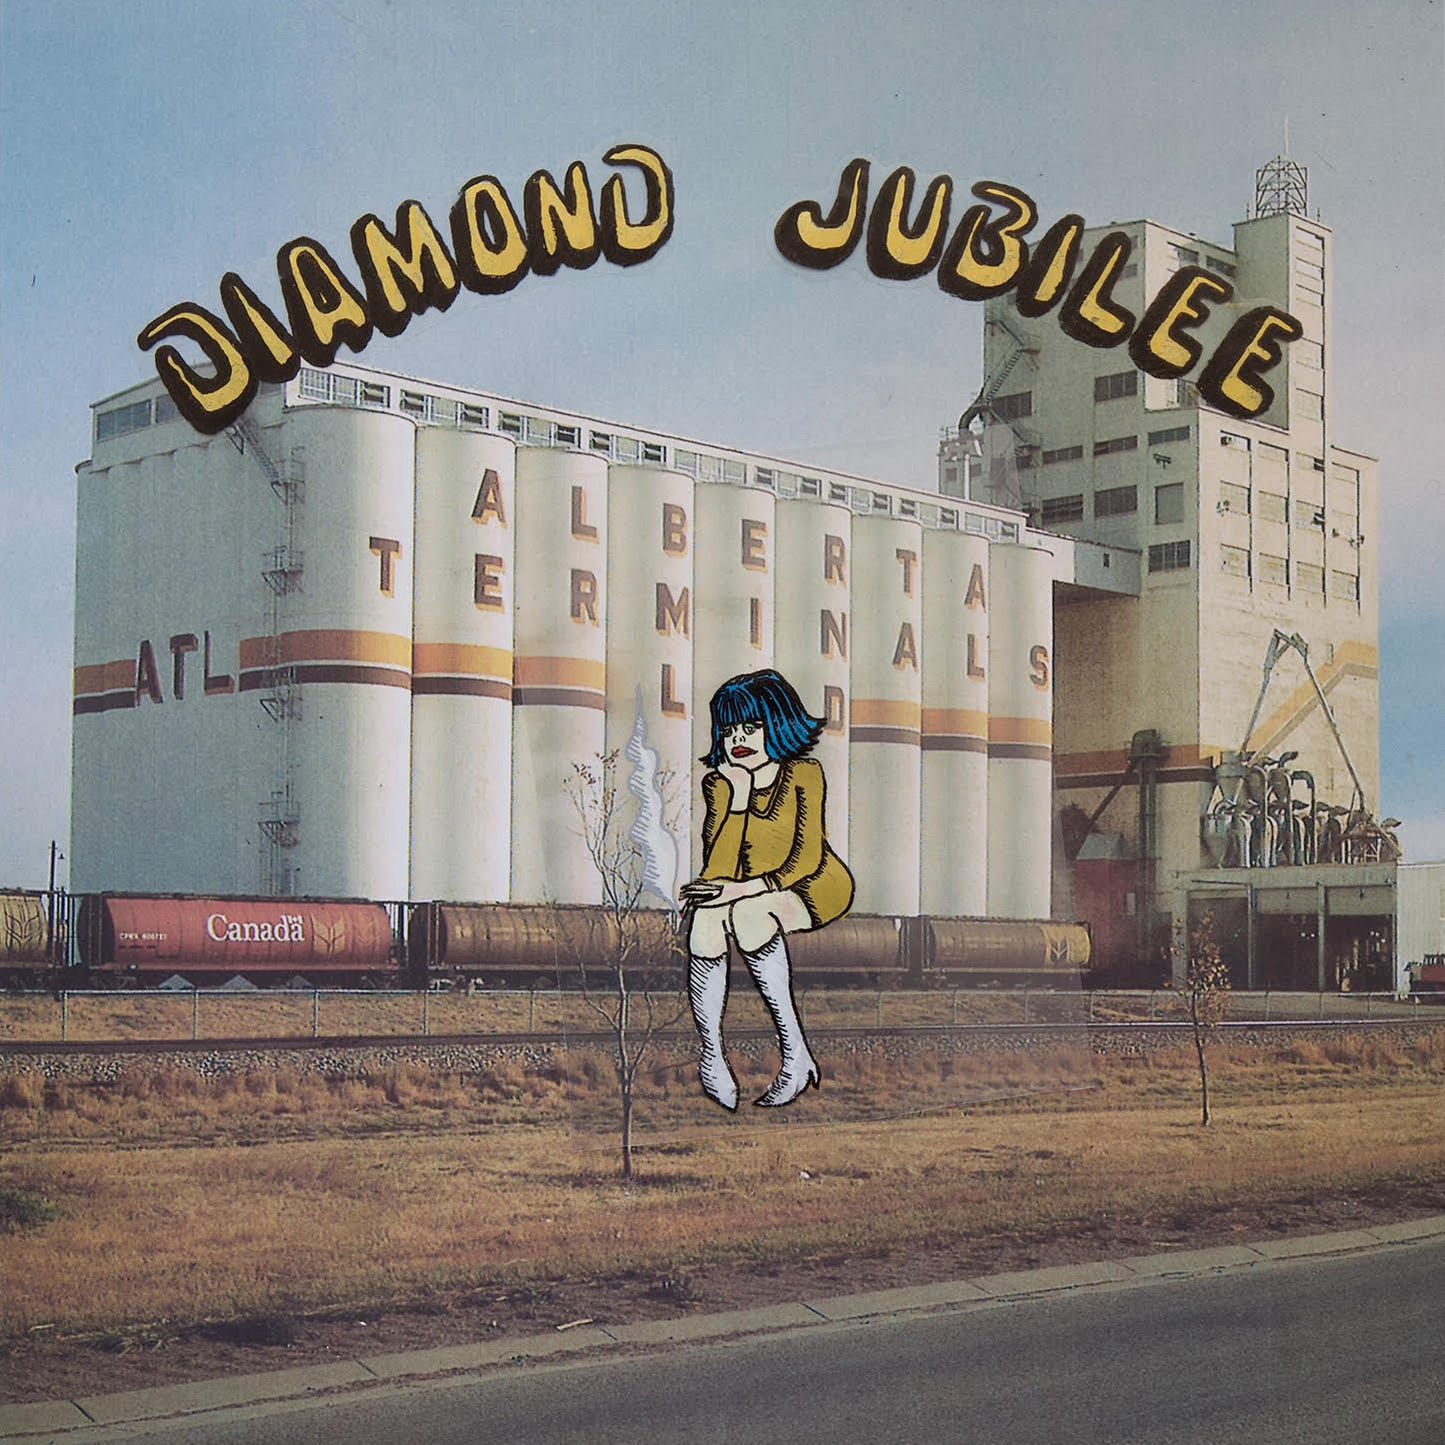 film-looking photo of a massive grain elevator labeled "Alberta Terminals", with the words "Diamond Jubilee" illustrated on it, accompanied by an Archie-comics style character in an umber-yellow mini dress and cornflower blue, heeled, knee-high boots, drawn as though sitting on the train in the photo, somewhat distraught and holding a fuming cigarette